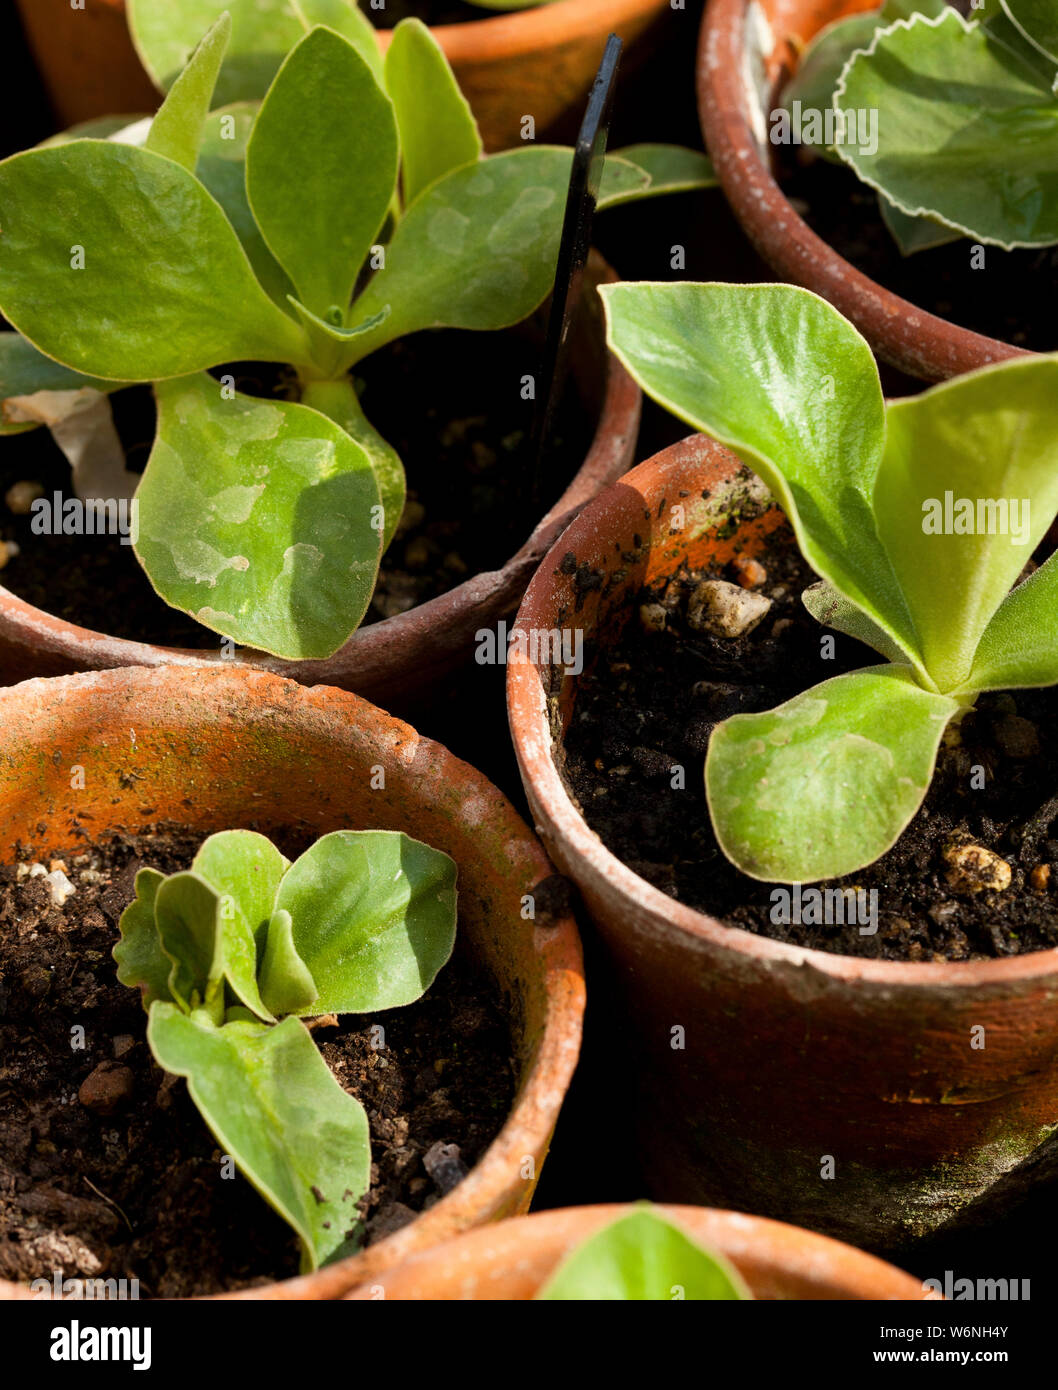 Young plants growing in terracotta pots Stock Photo